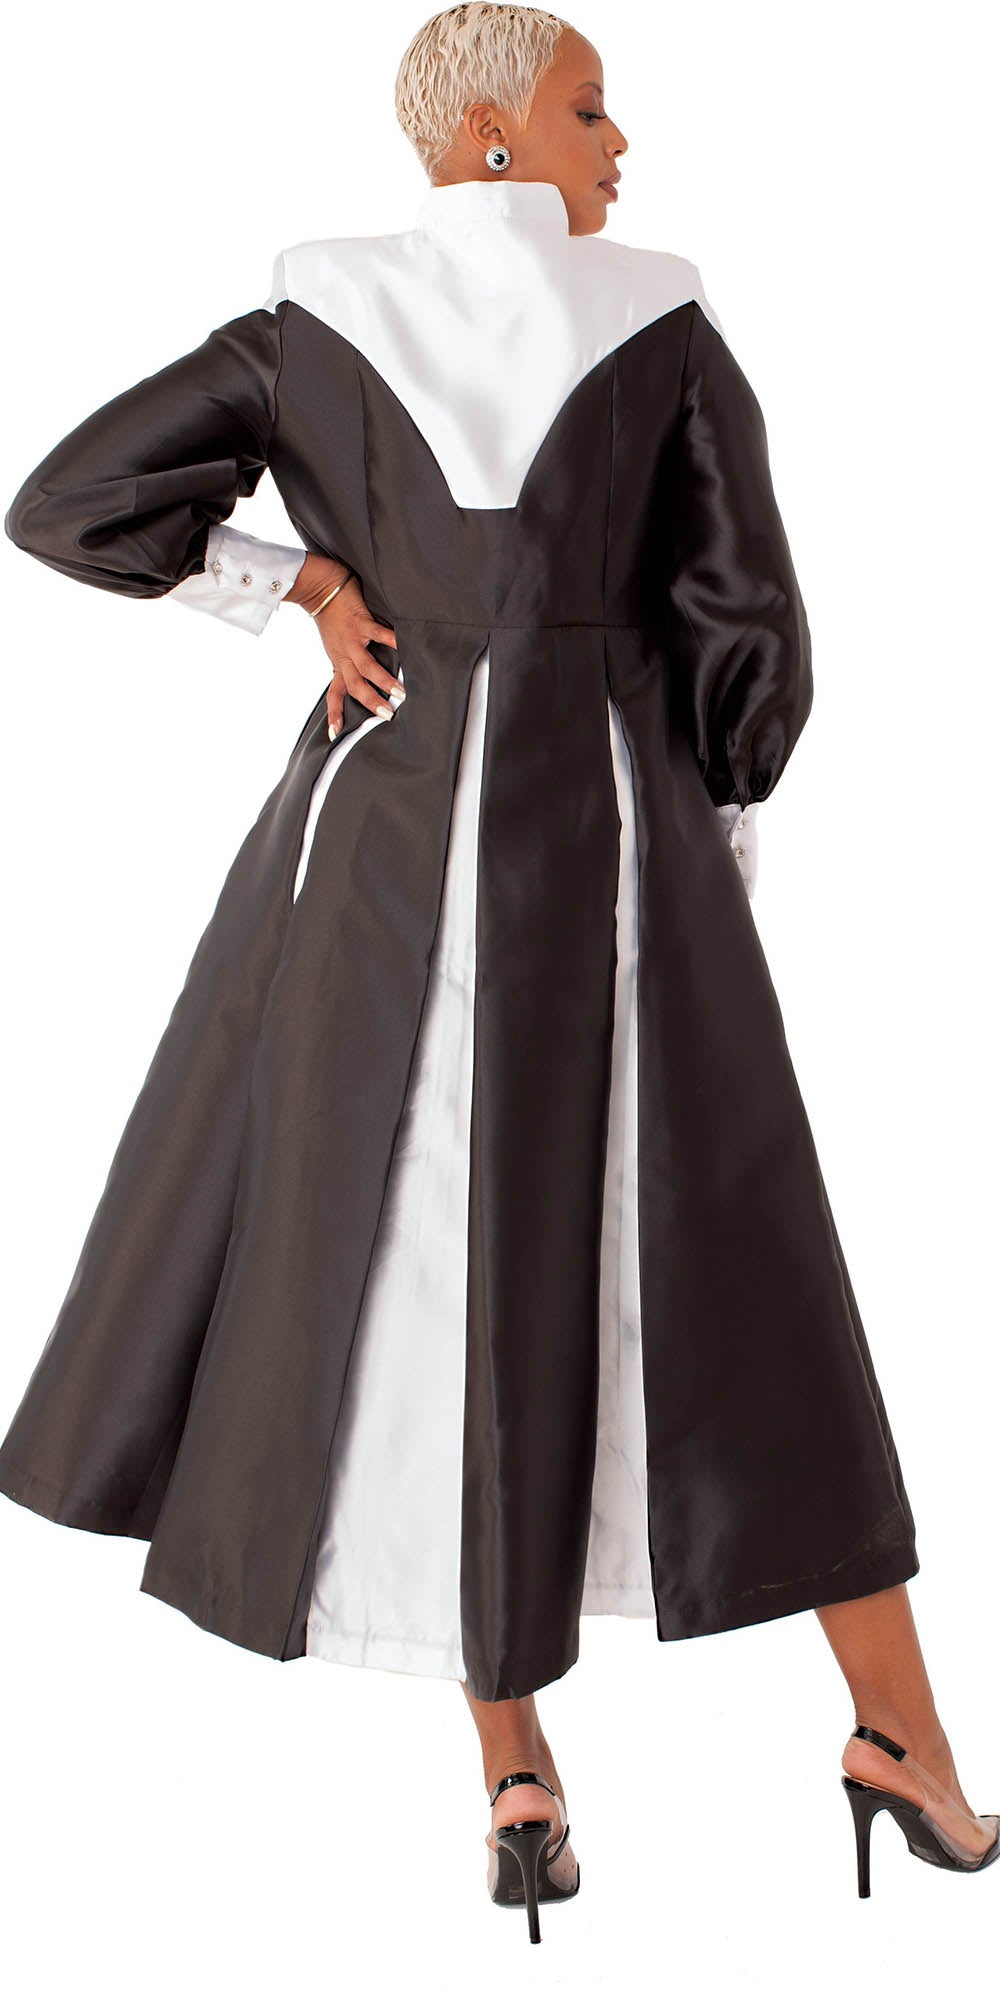 Tally Taylor - 4802 - Black White - Women's Clergy Dress With Bishop Sleeves